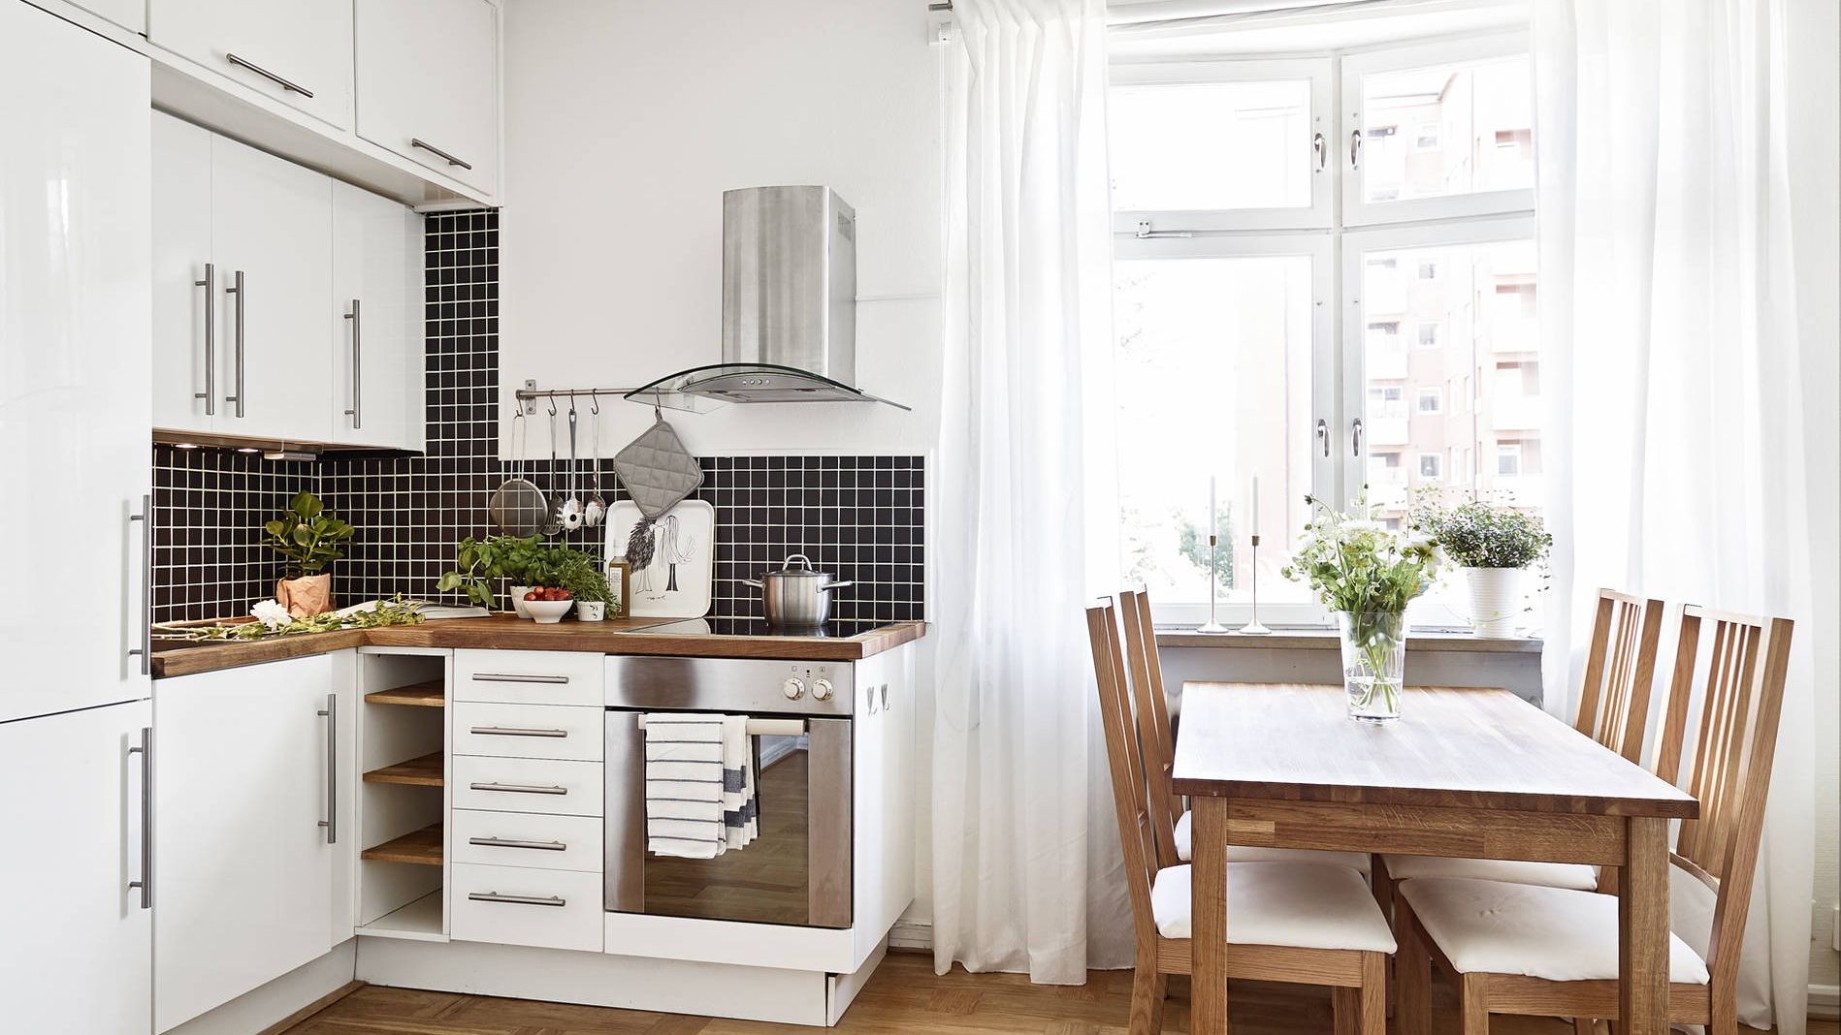 5 Space-Making Hacks for Small Kitchens - how can i make my kitchen more efficient?